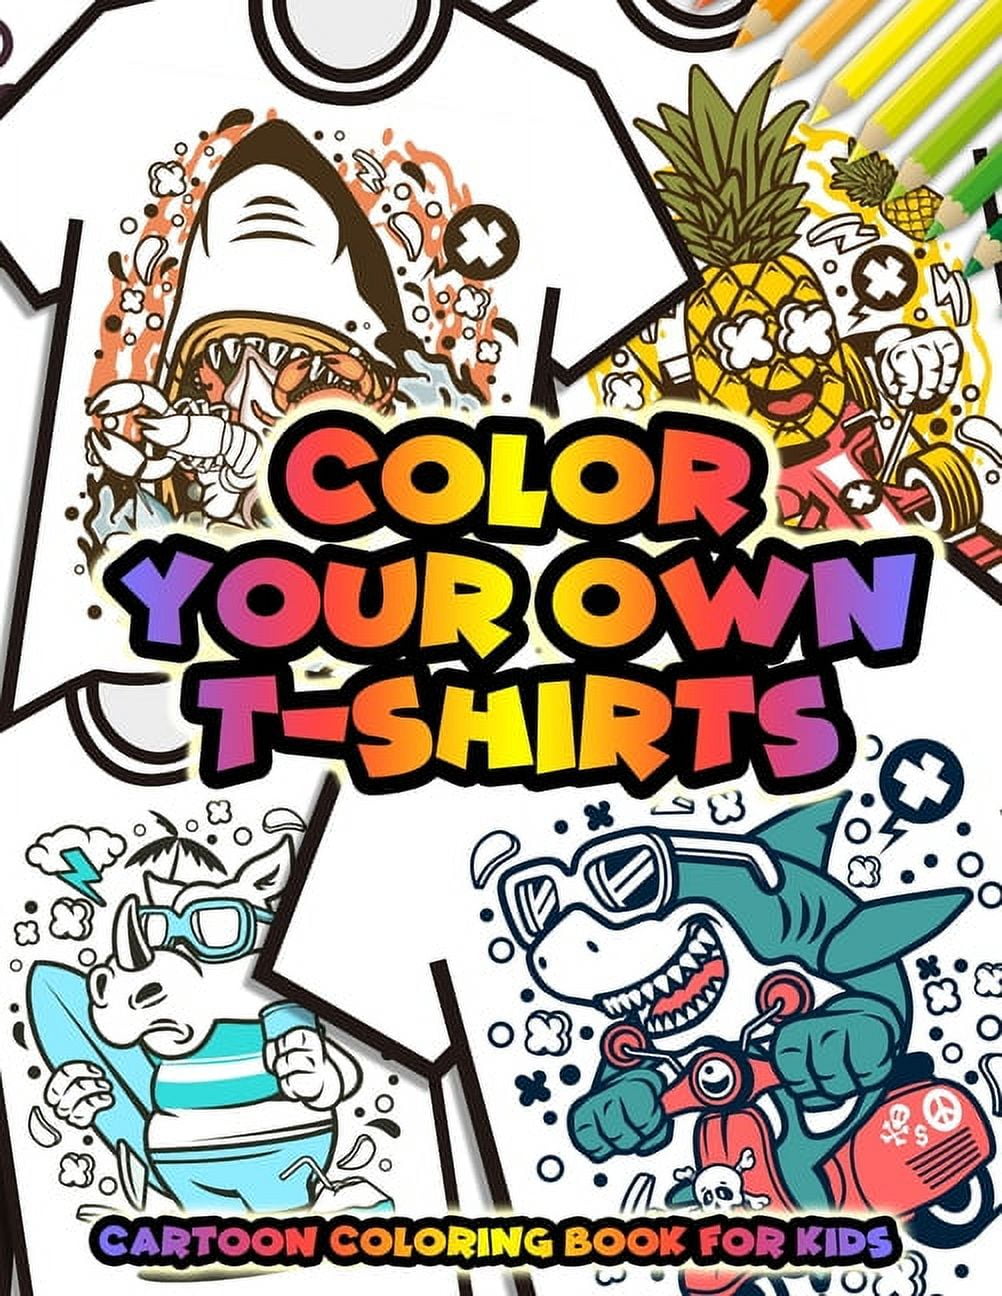 Color Your Own T-Shirts Cartoon Coloring Book For Kids: Cartoon Characters Coloring Book for Boys - Funny Animal Characters Such as Dinosaur Cat Shark Leopard and More. [Book]